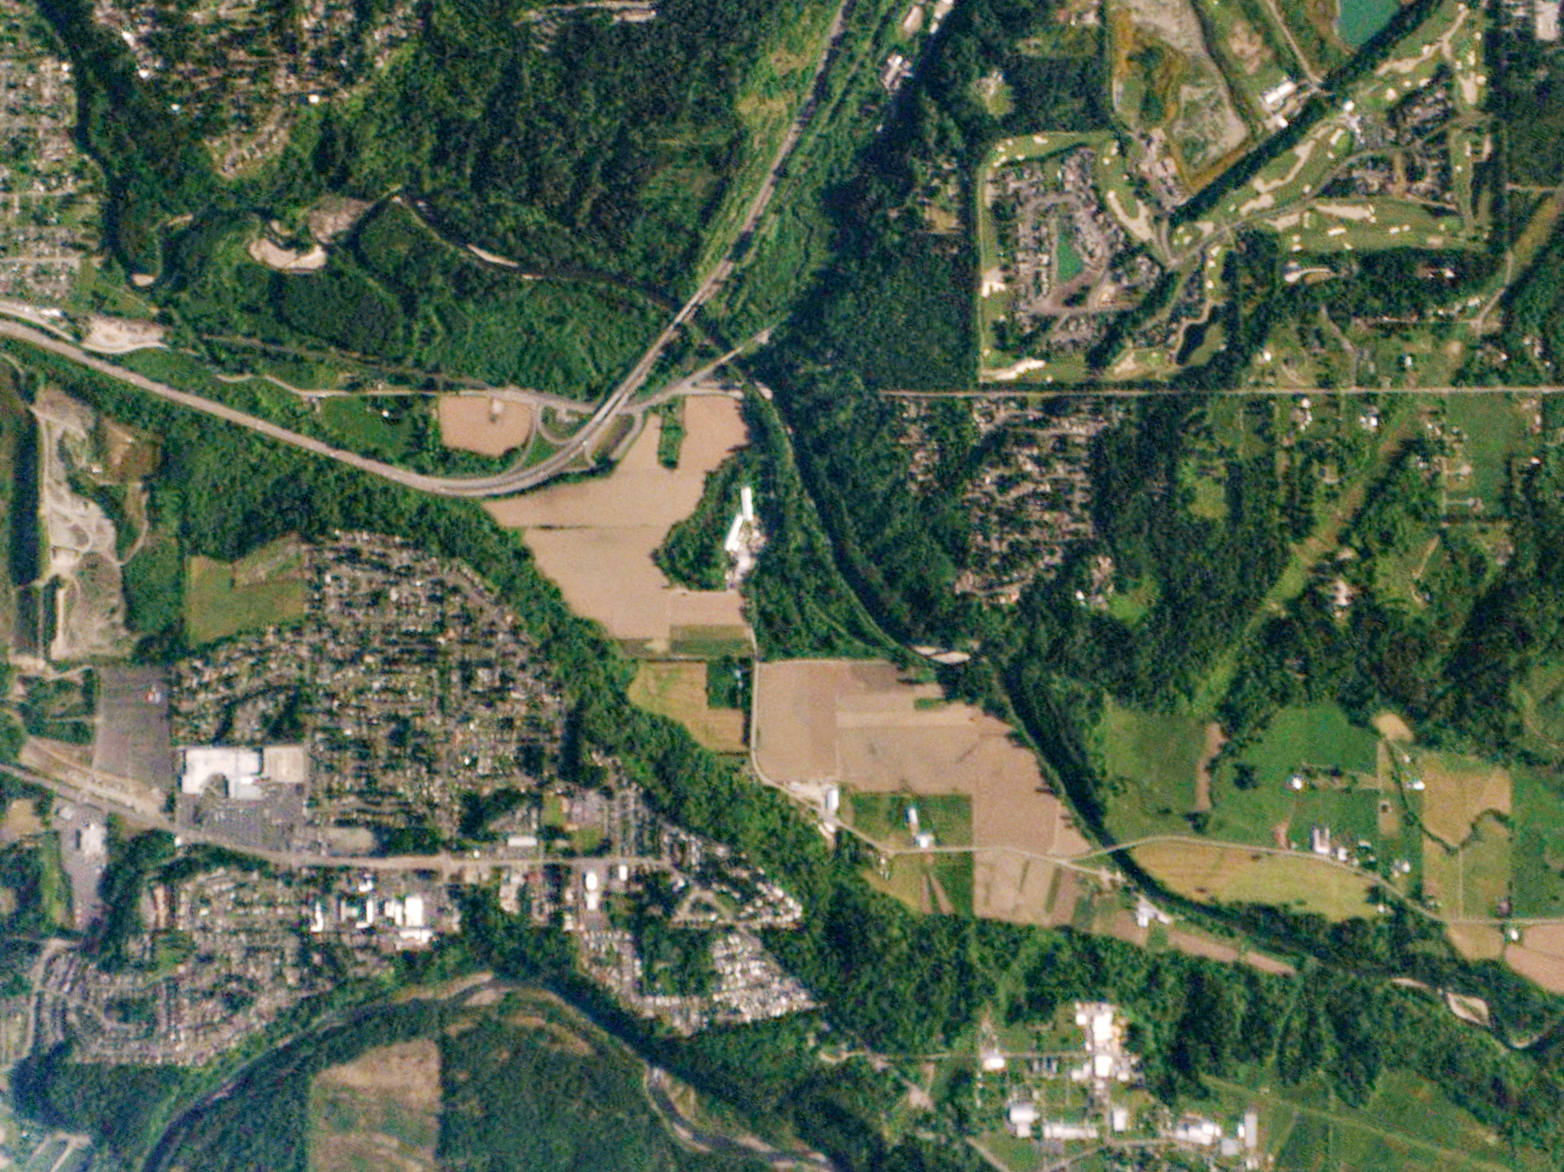 Auburn, Wash., is suburb of Seattle about 29 miles from the city center. This 6.3-square-mile view was photographed on May 18, 2015. The researchers say the city of Seattle could source 100 percent of its food from within a 100-mile radius.